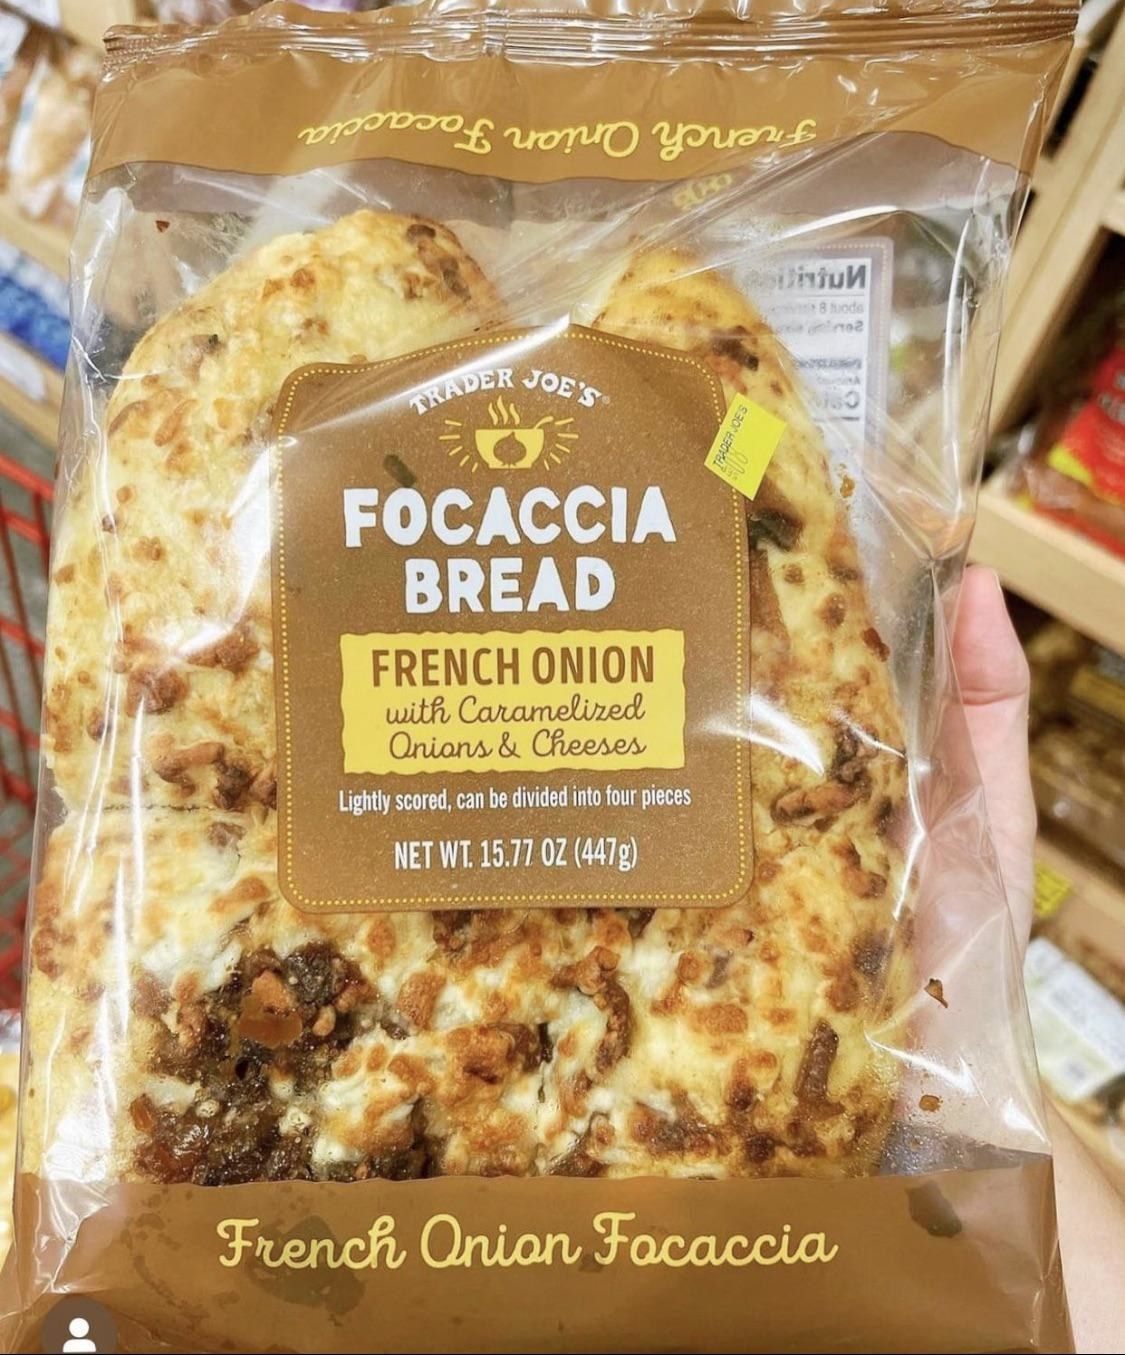 A package of French Onion Focaccia Bread